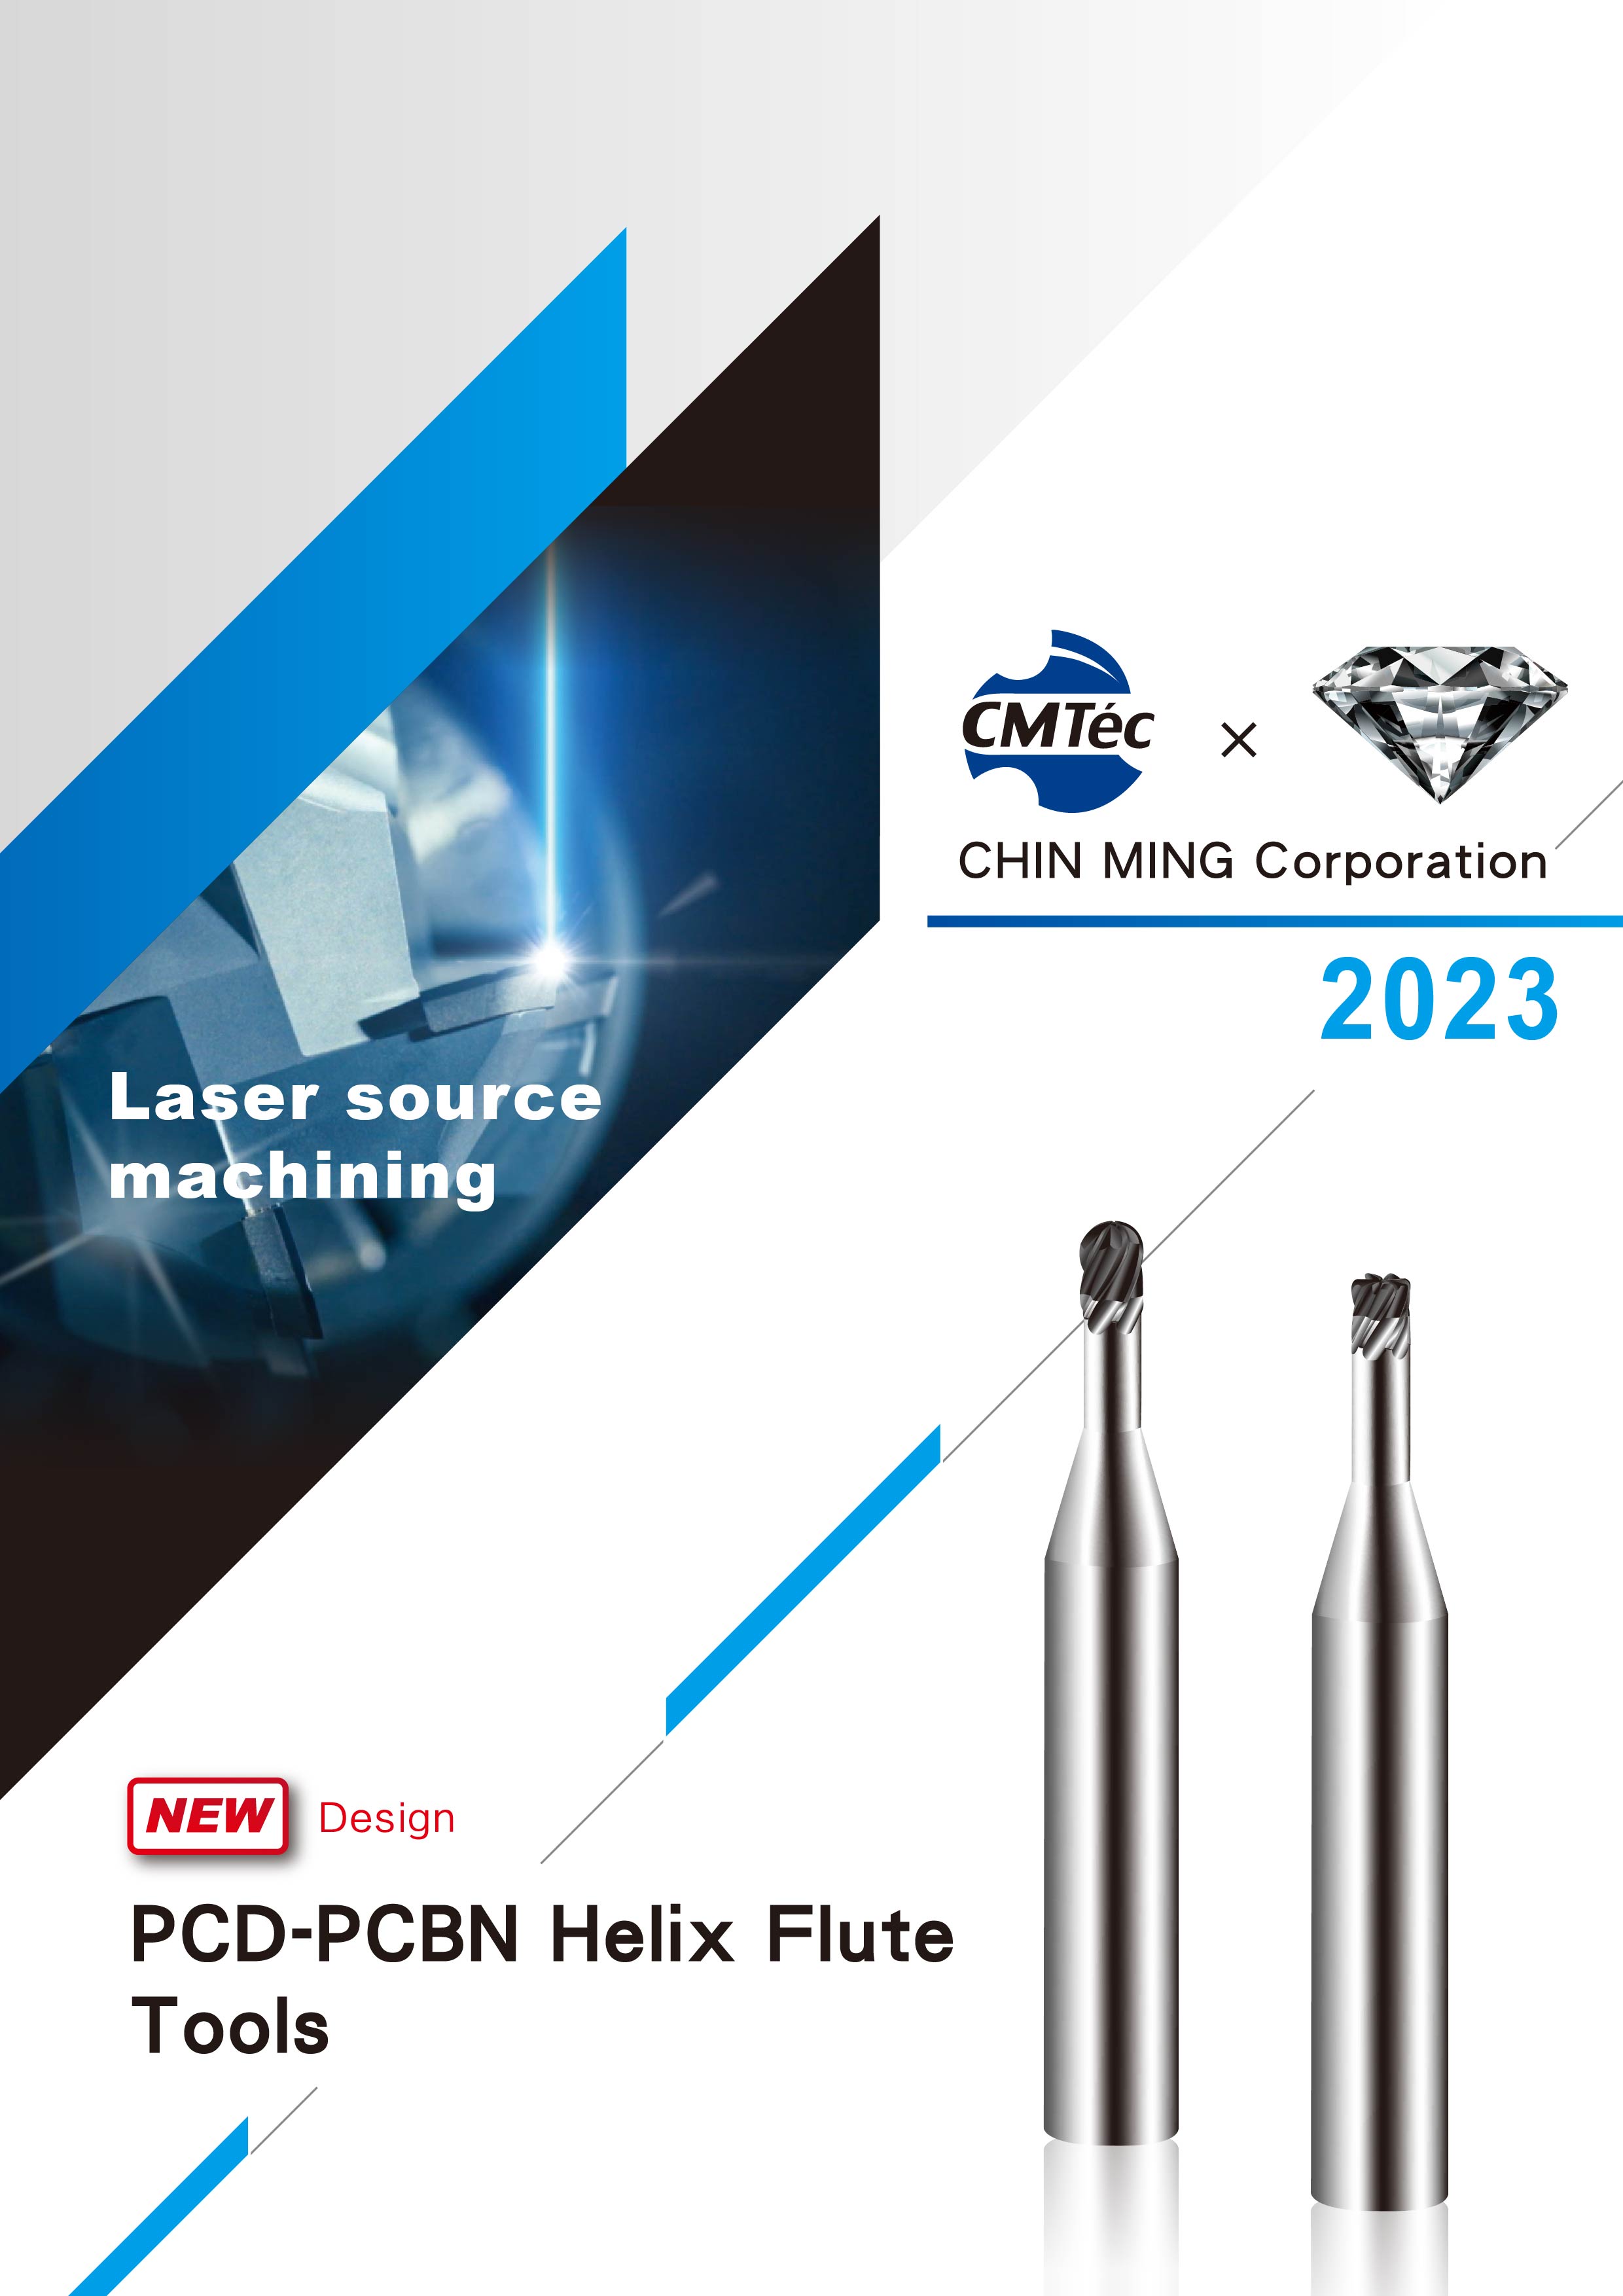 PCD-PCBN Helix Flute End Mills